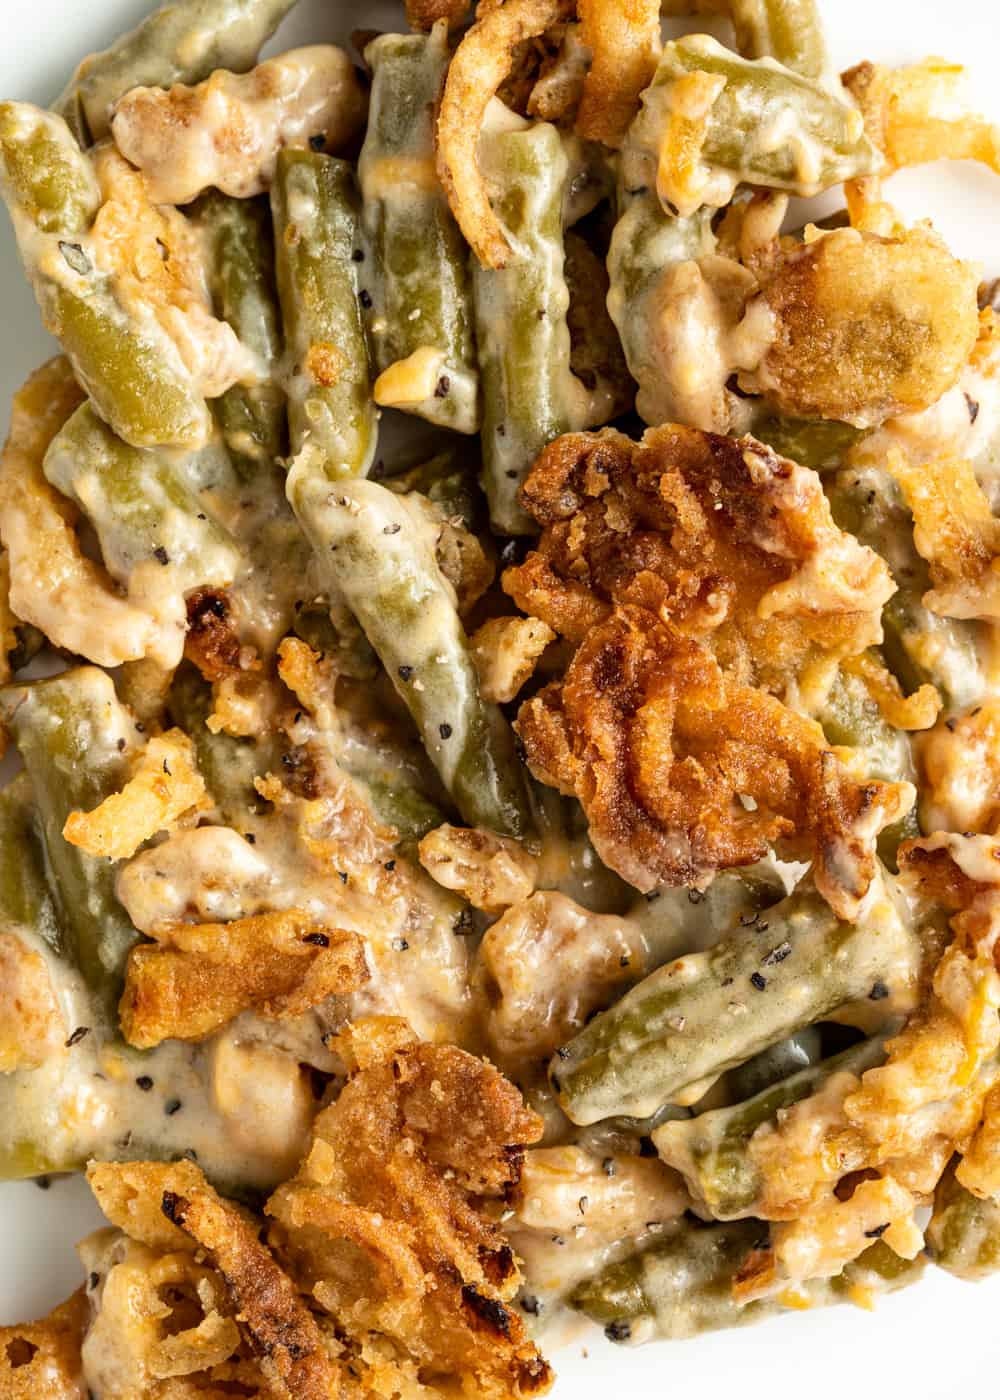 extreme closeup: french's green bean casserole with crispy onions on top